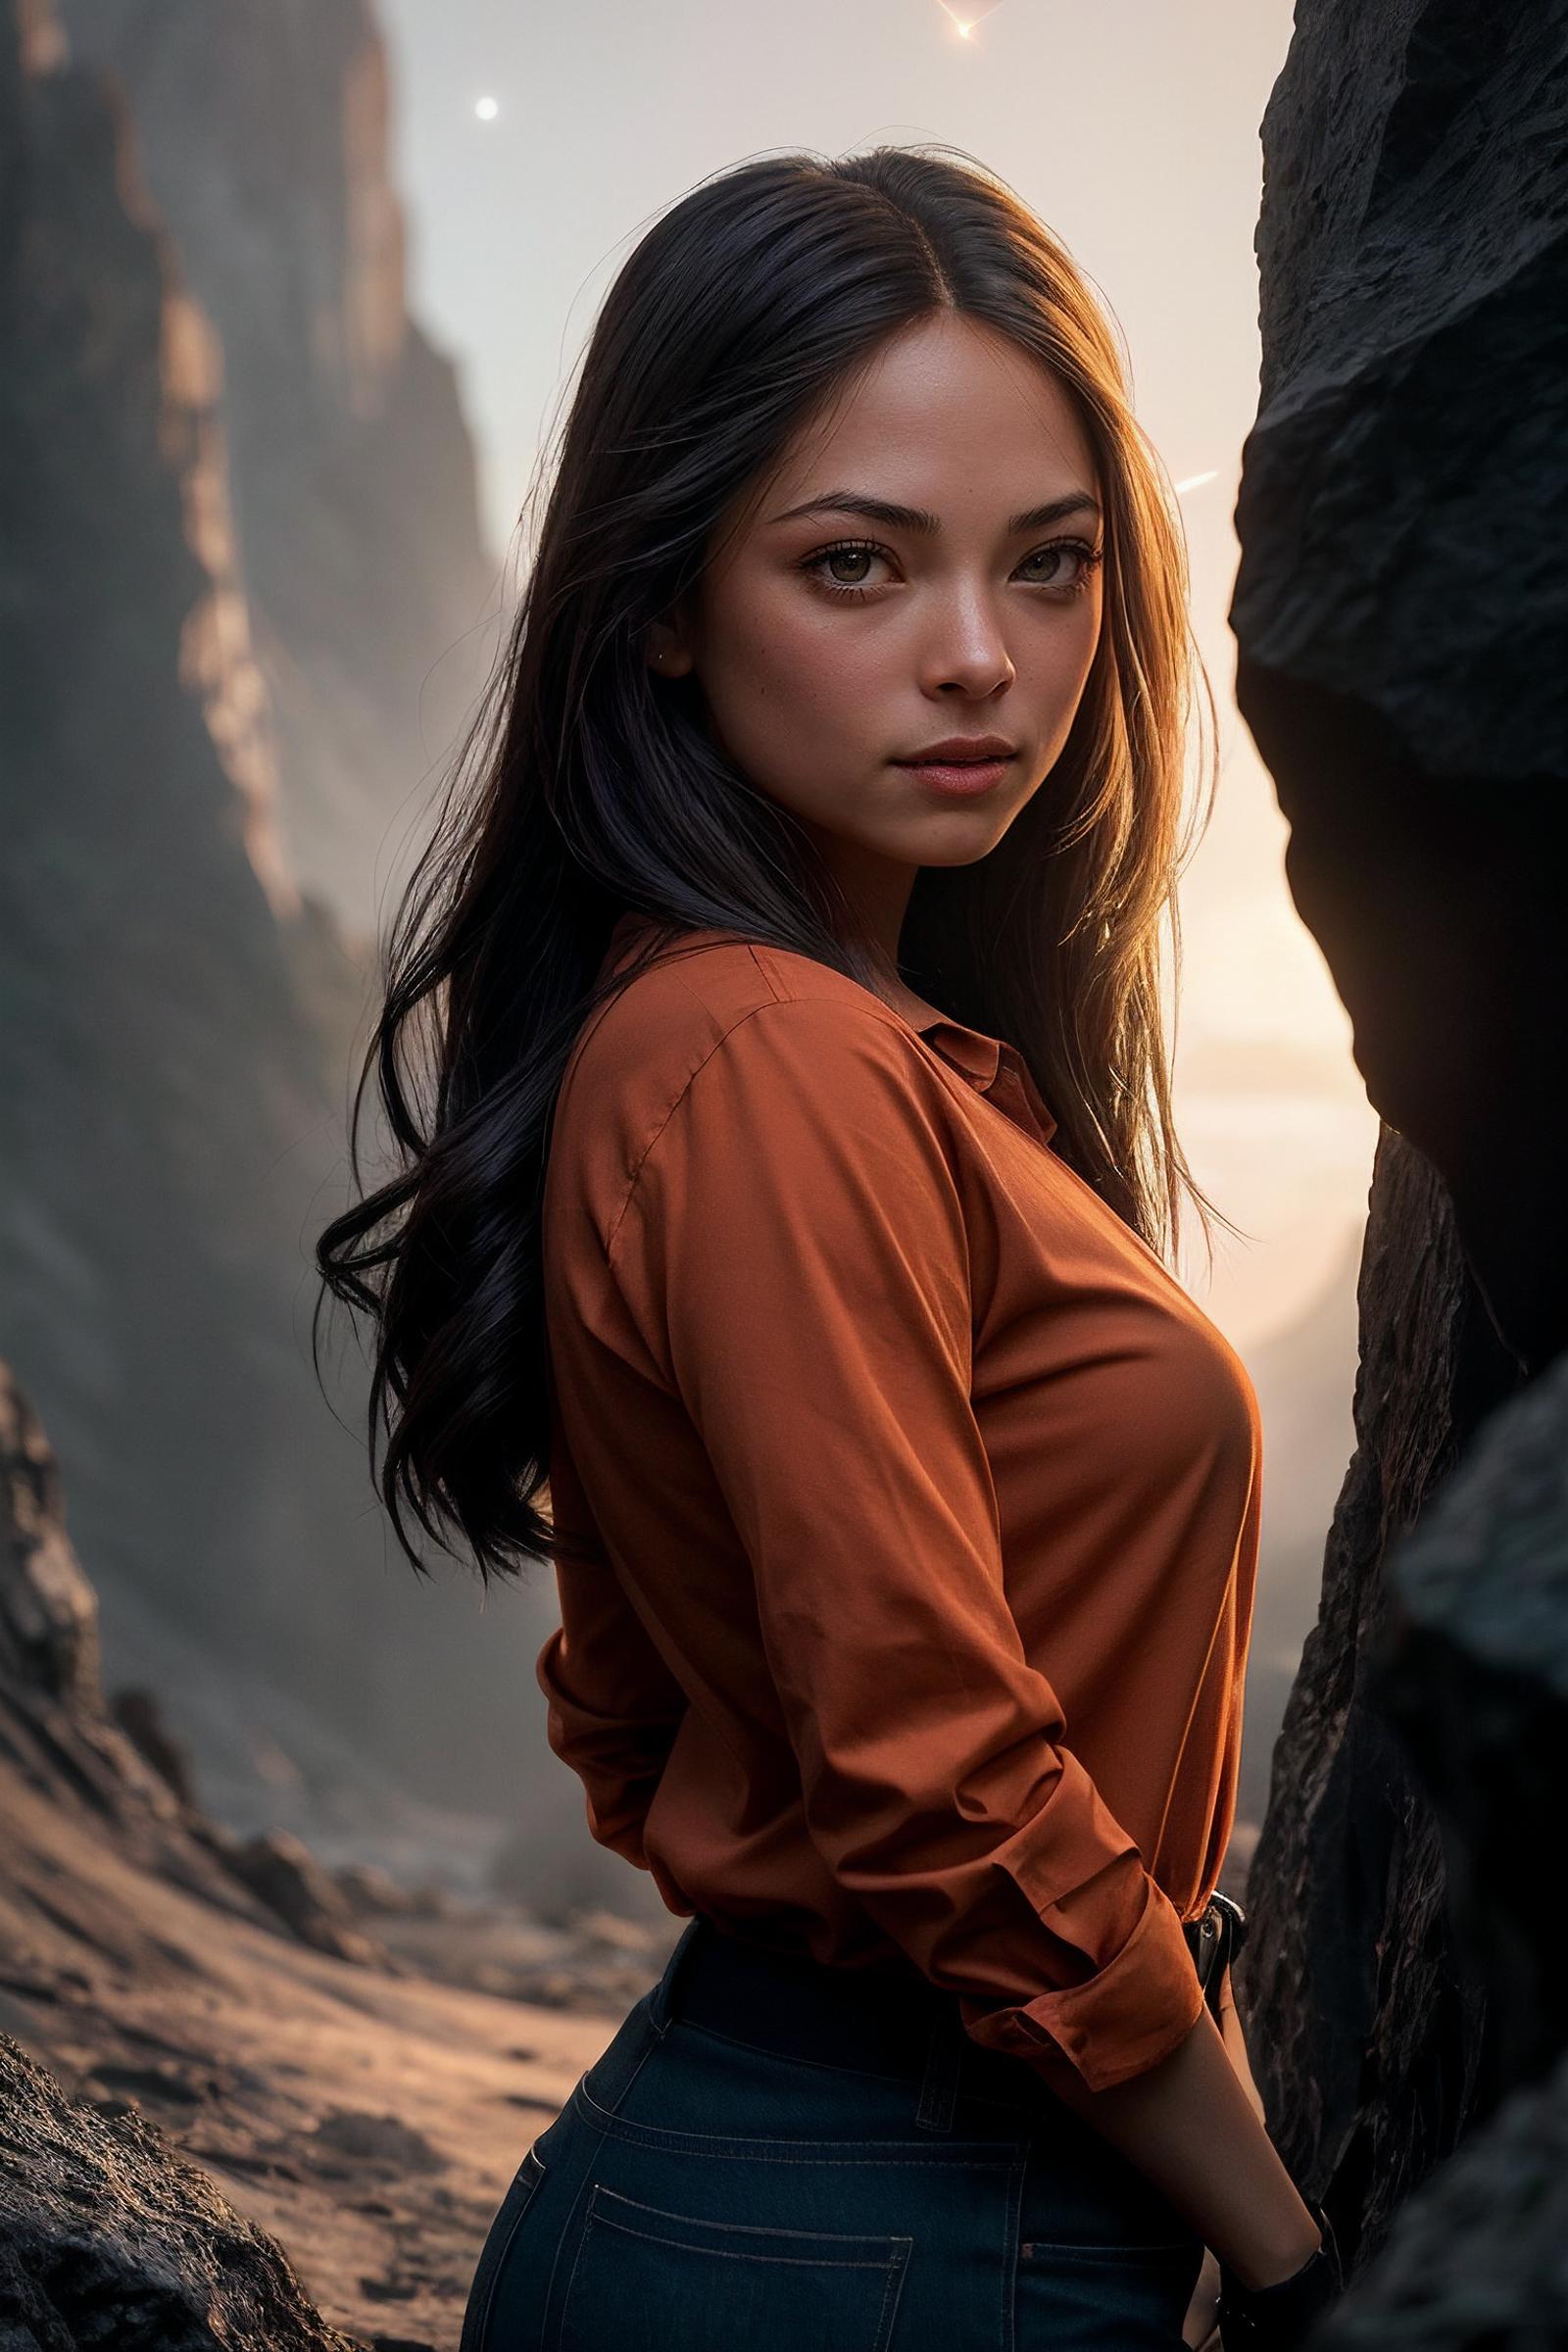 Woman with Long Hair in Orange Blouse Posing in a Mountainous Setting